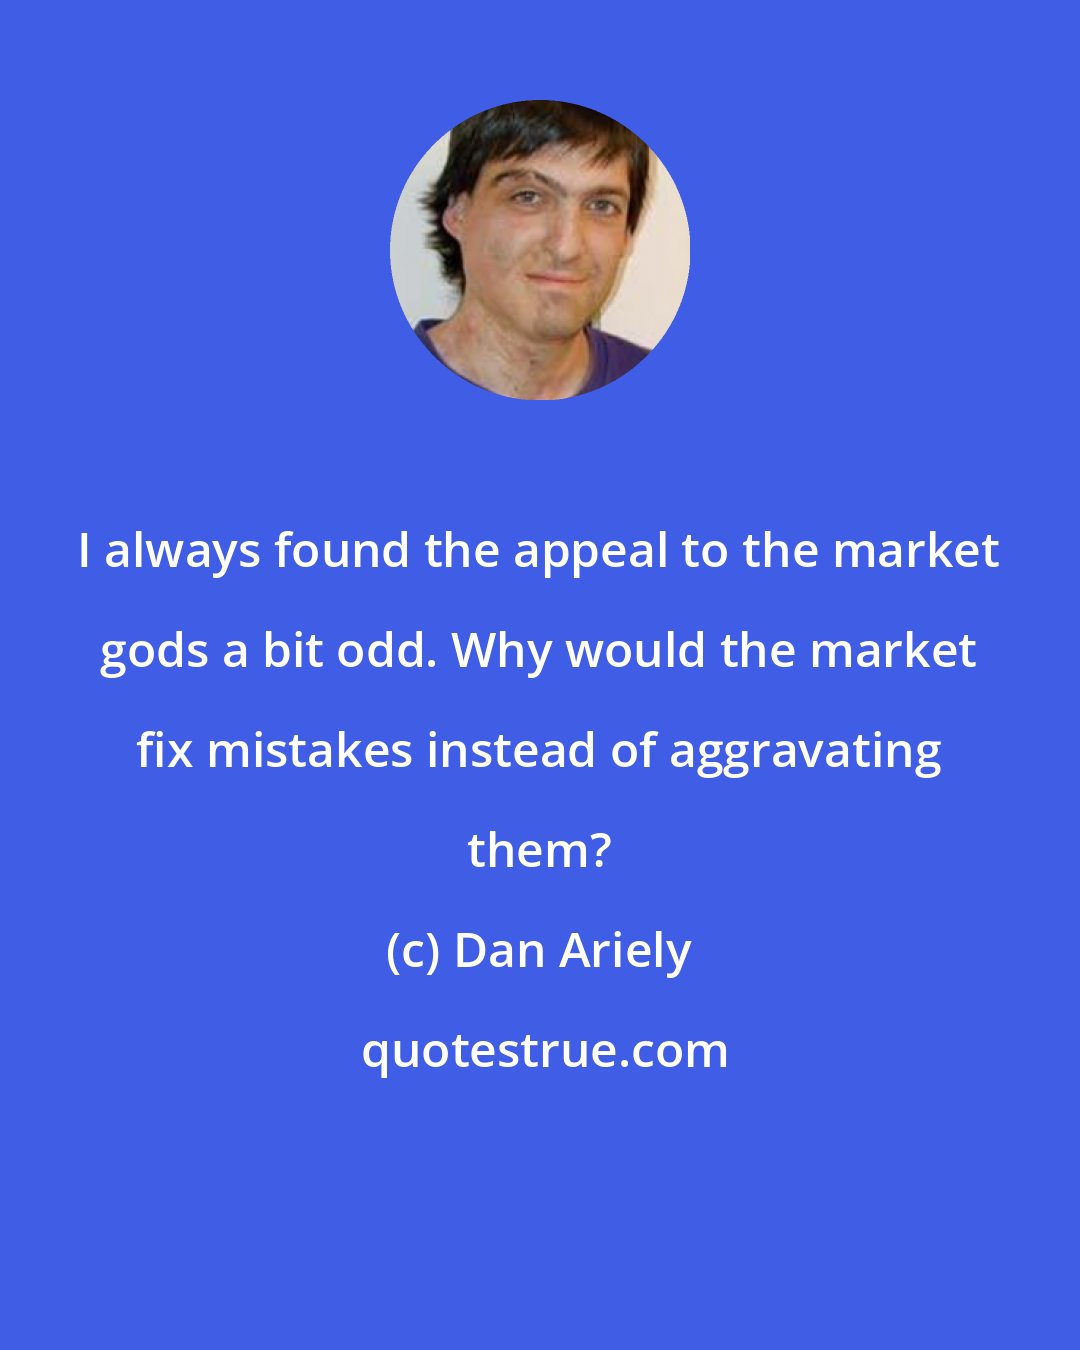 Dan Ariely: I always found the appeal to the market gods a bit odd. Why would the market fix mistakes instead of aggravating them?